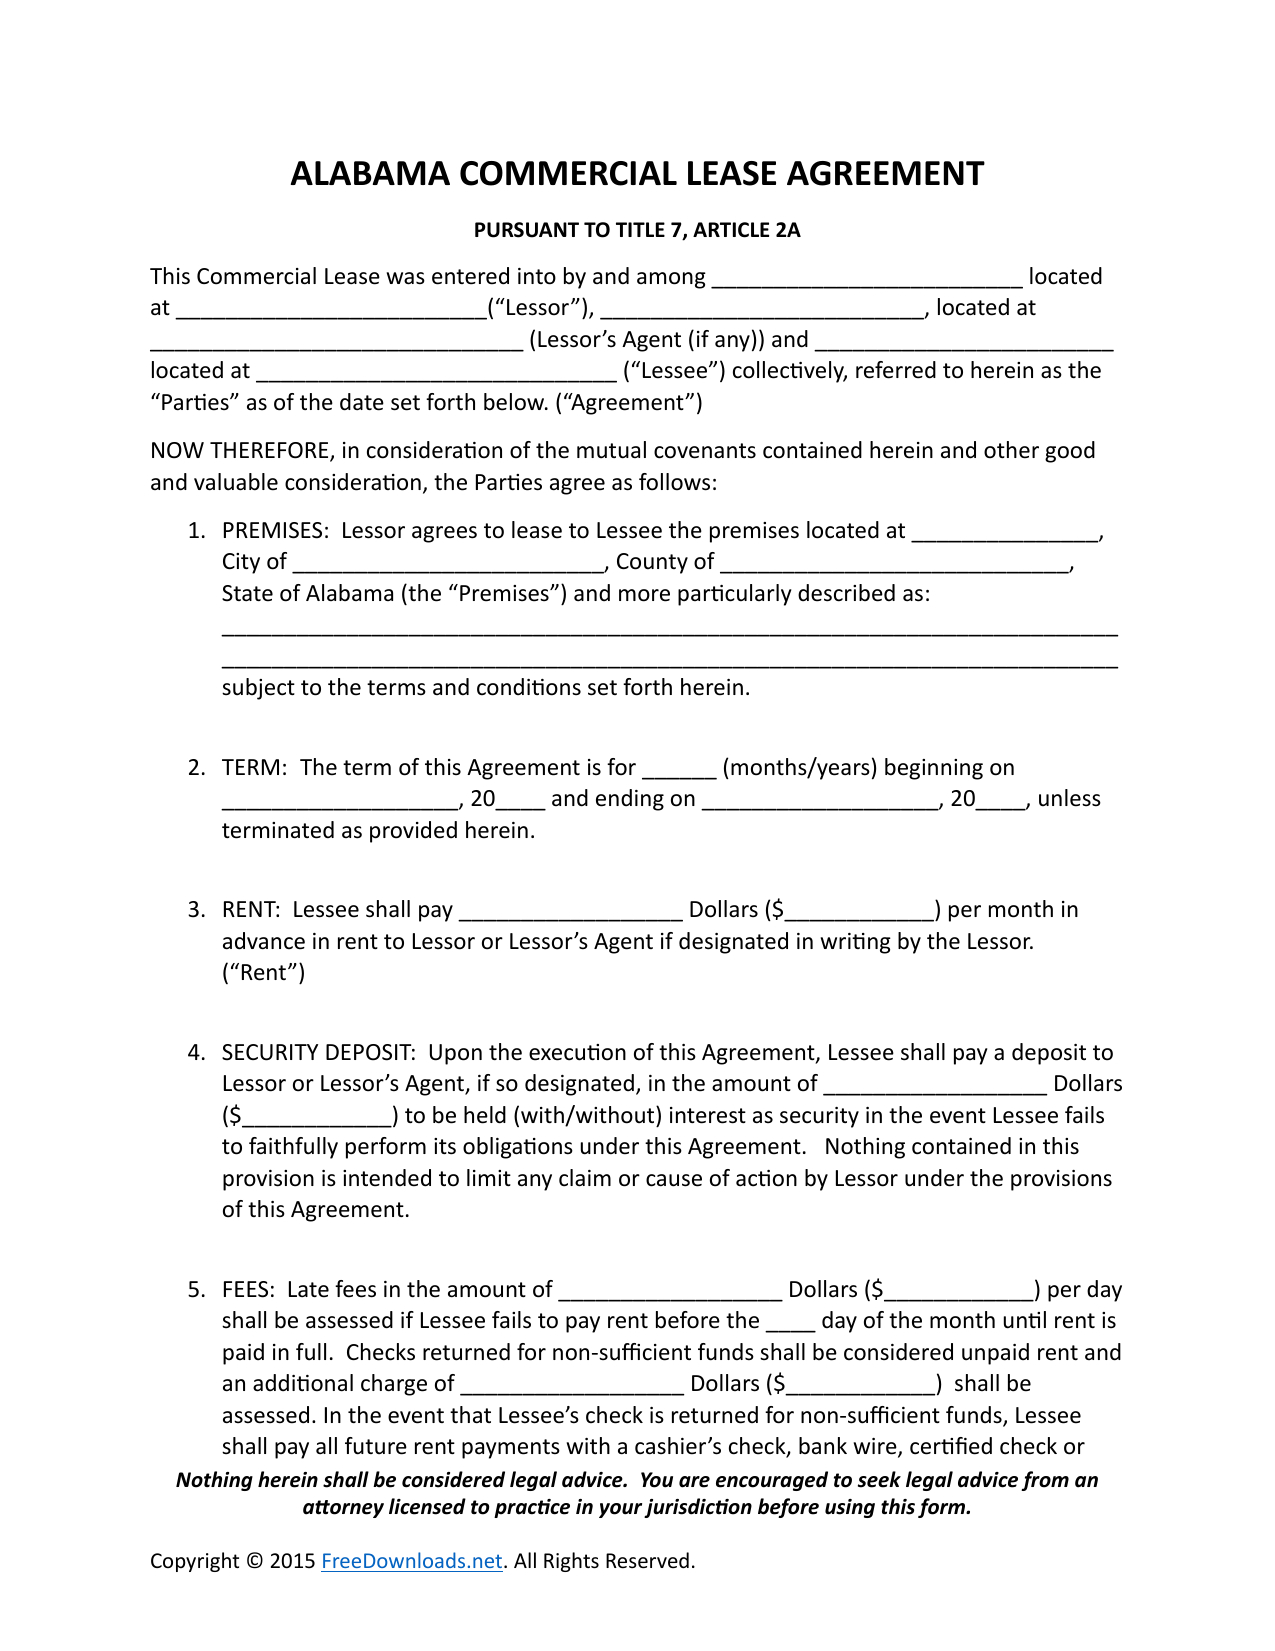 Template Lease Agreement Download Alabama Commercial Lease Agreement Template Pdf Rtf